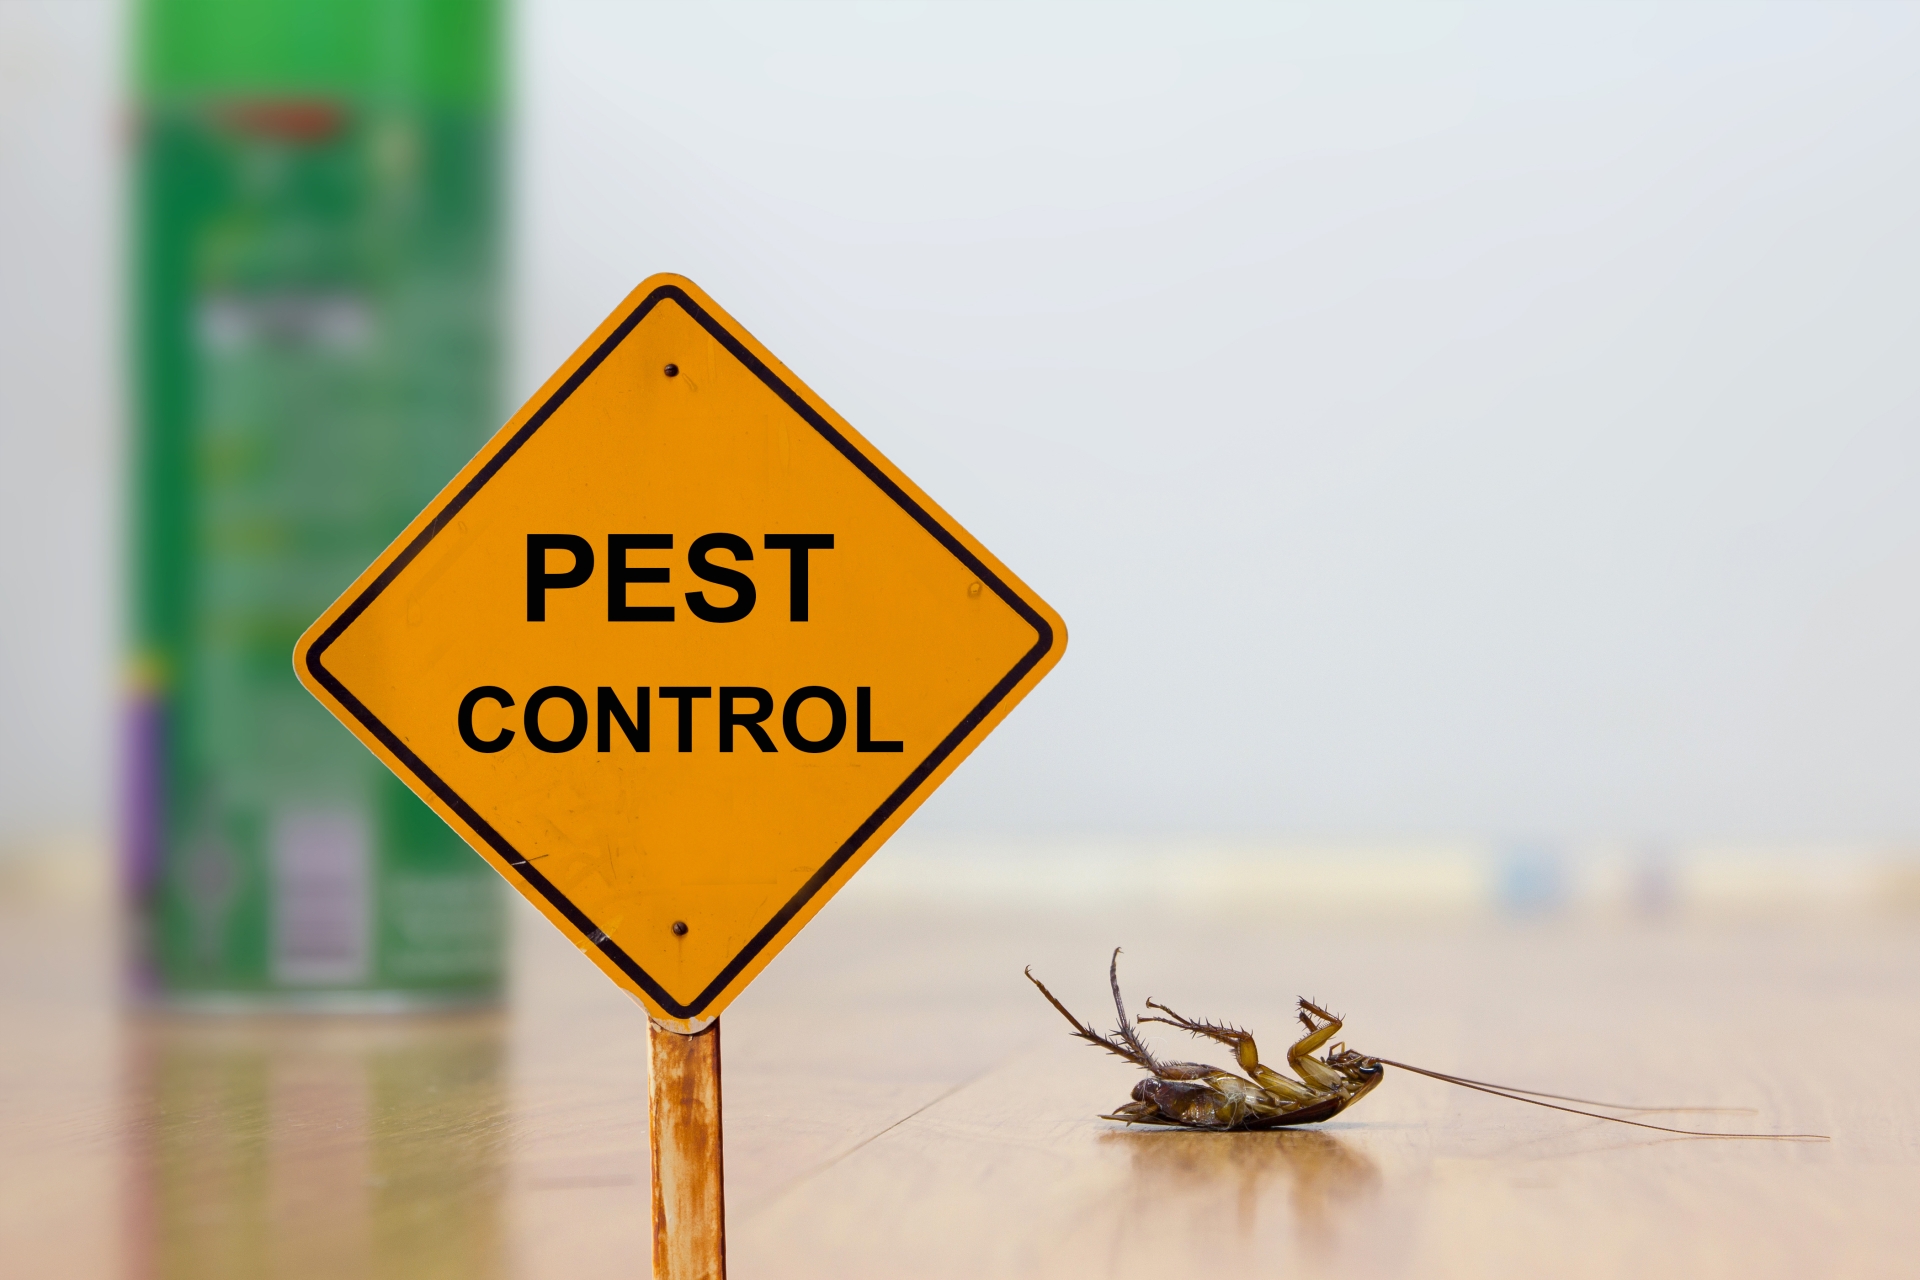 24 Hour Pest Control, Pest Control in Catford, Hither Green, SE6. Call Now 020 8166 9746